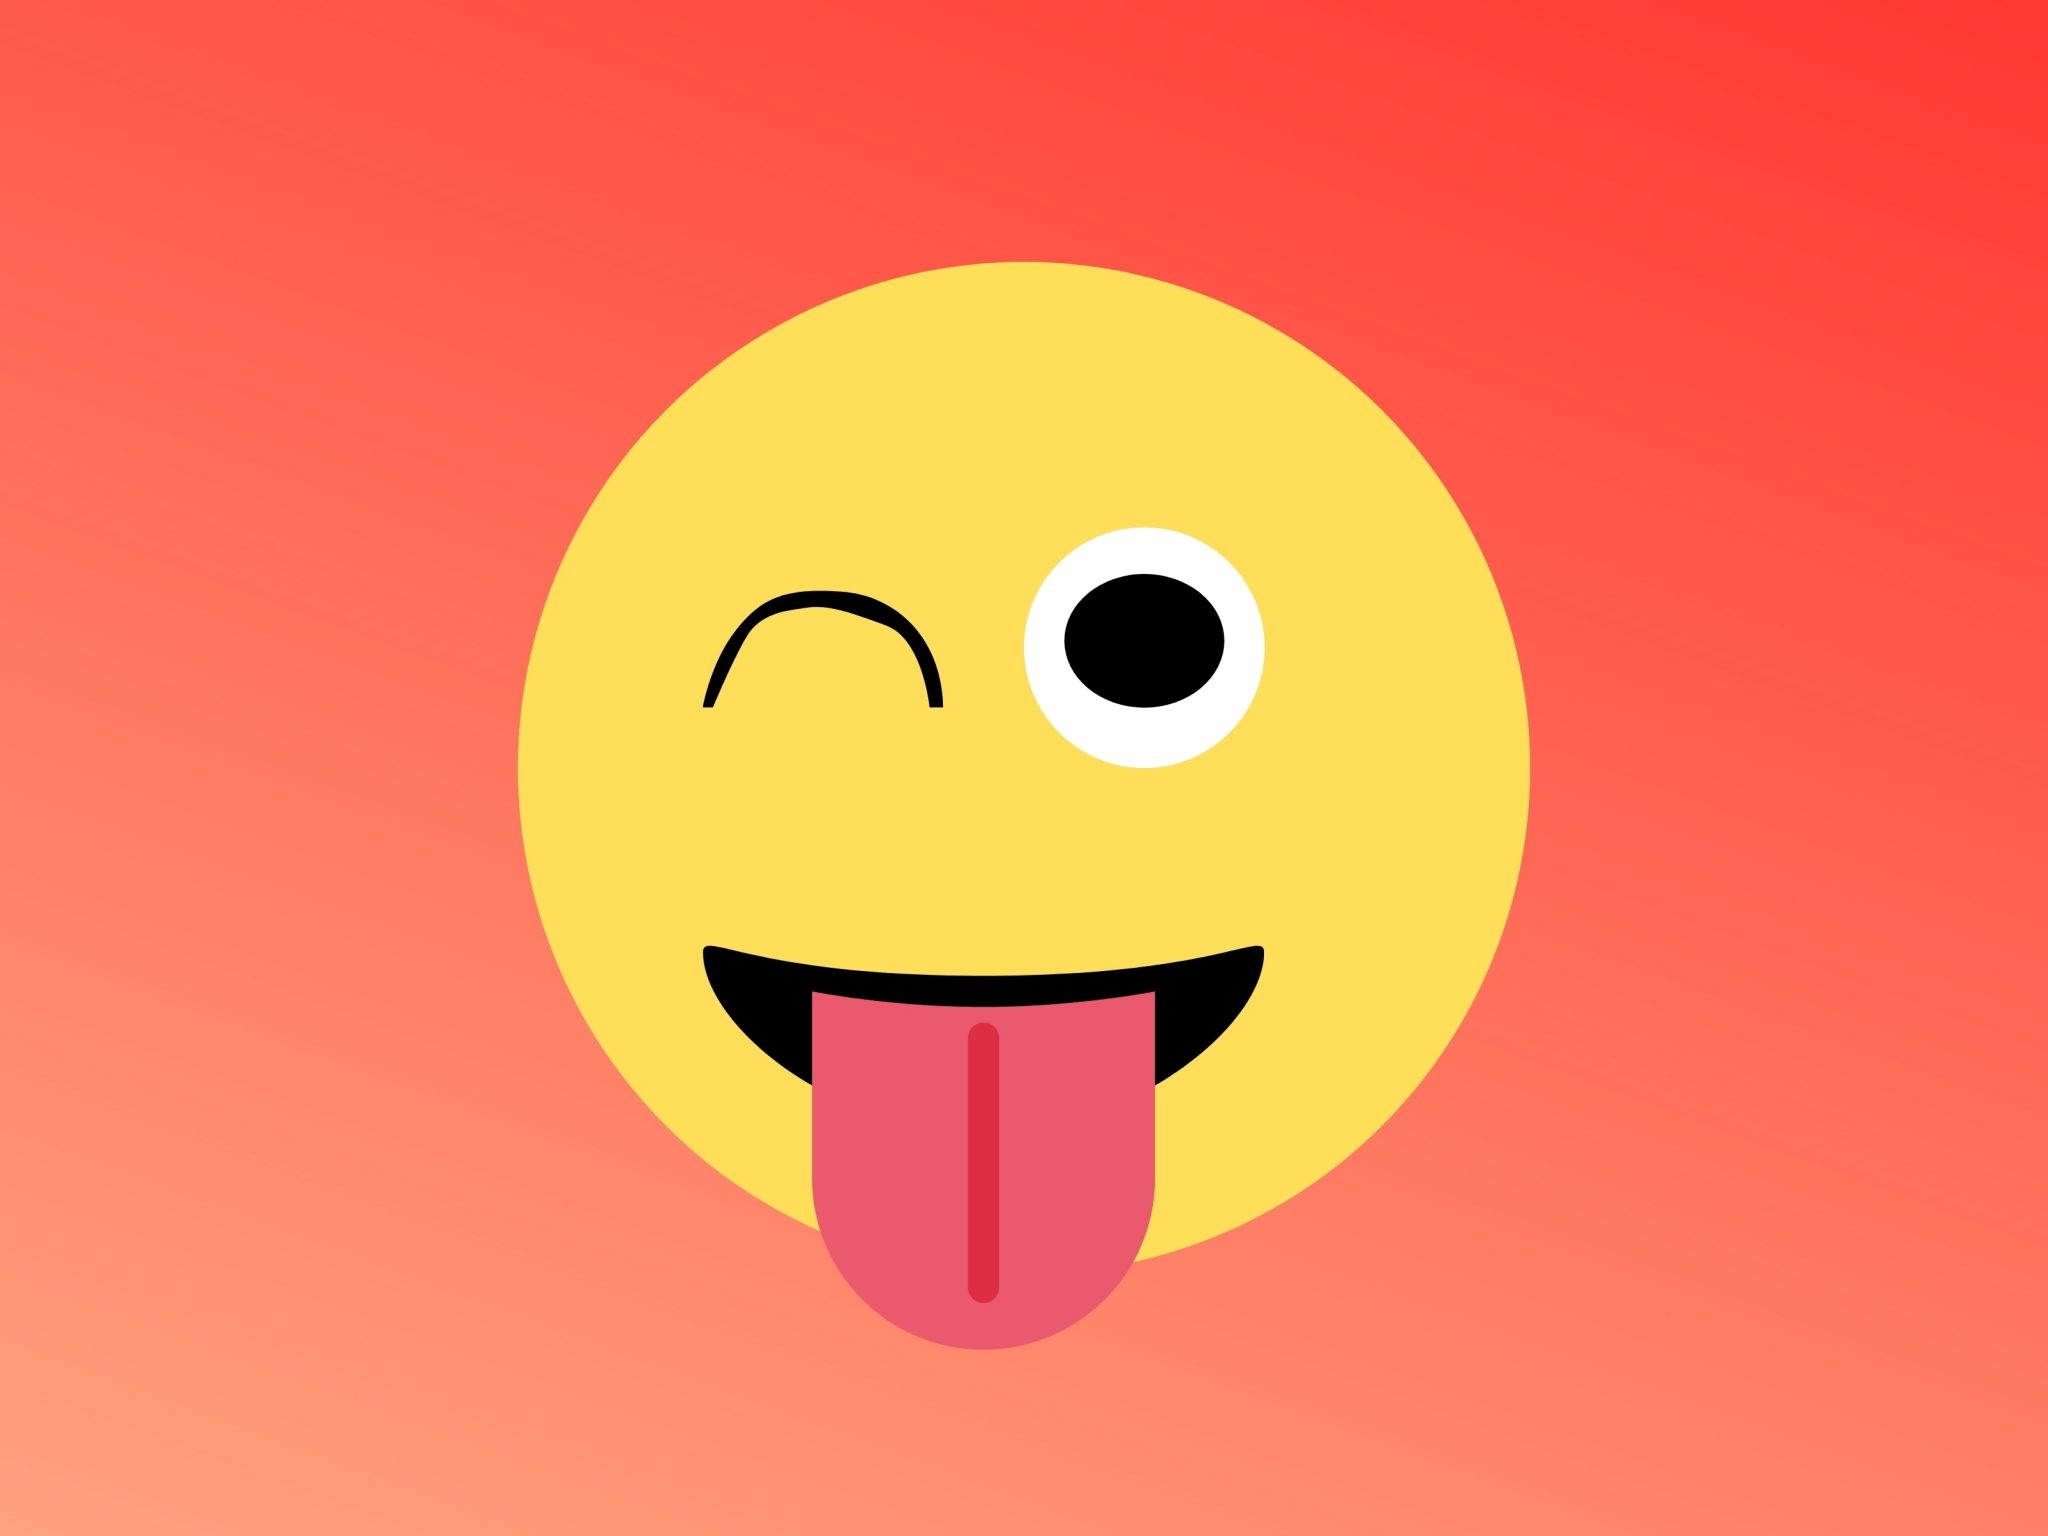 2048x1536 wallpaper Winking Face Tongue Red Background iPad Wallpaper 2048x1536 pixels resolution